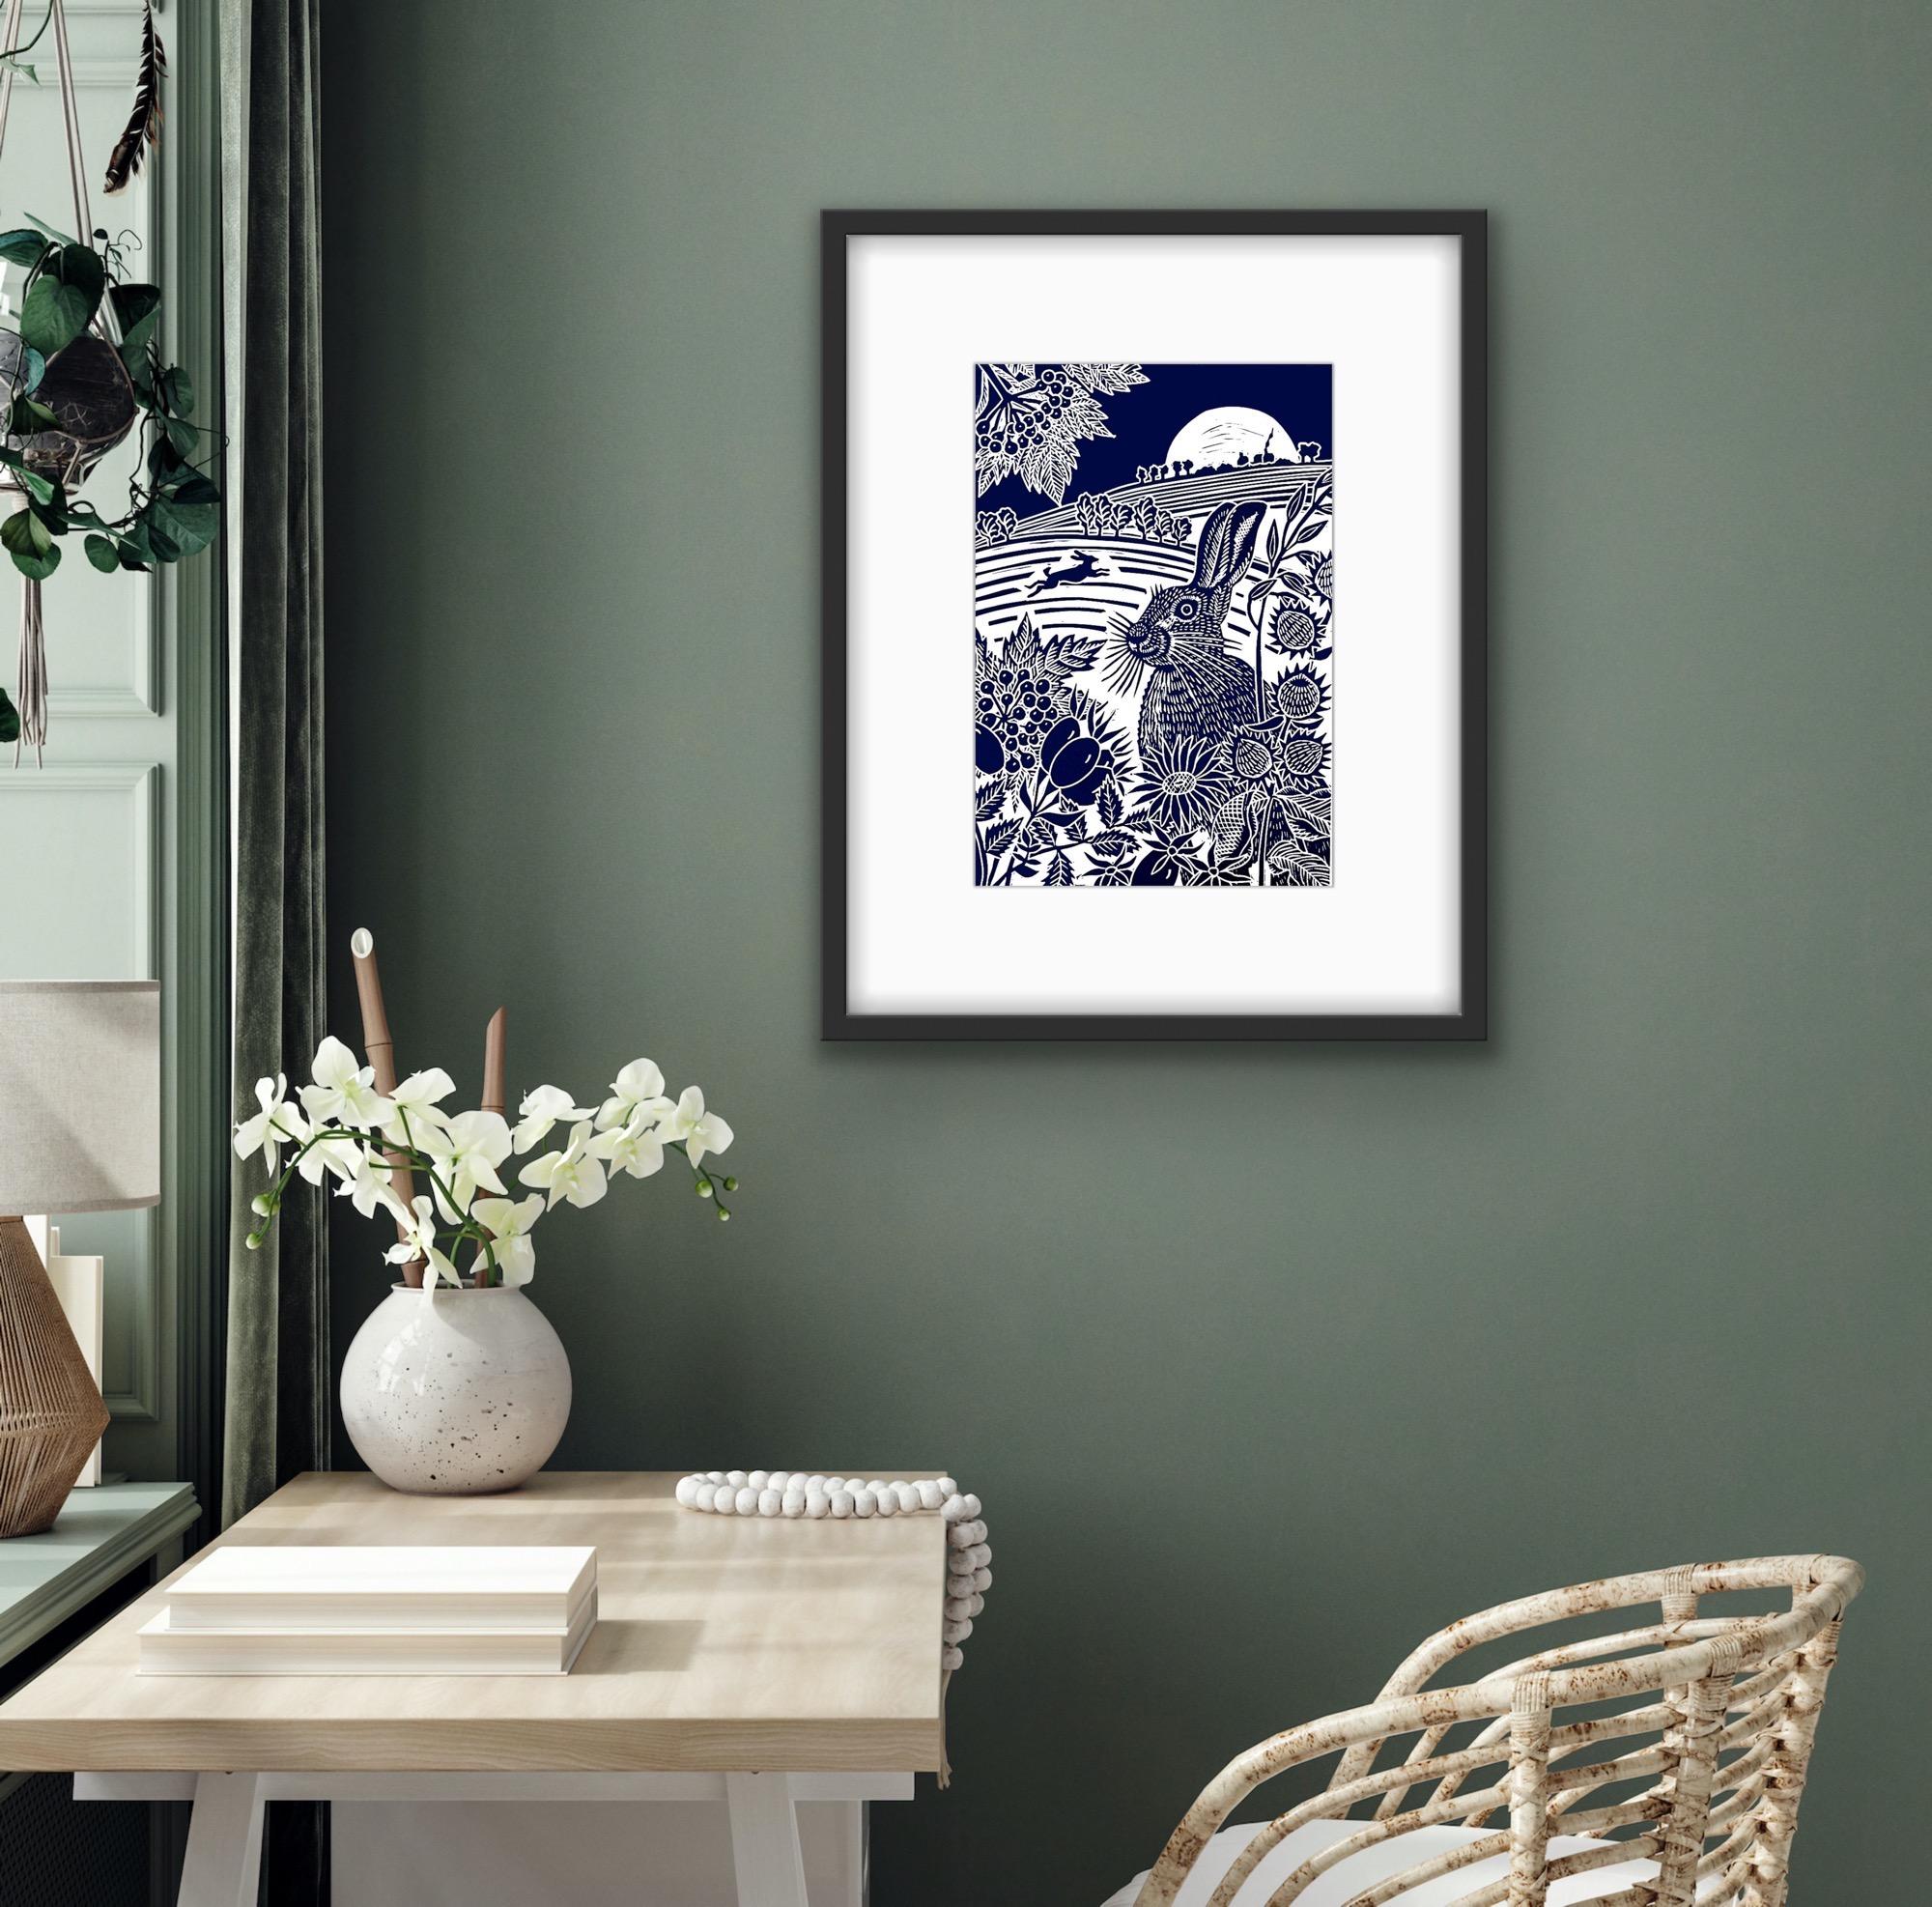 Harvest Moon Hares is a limited edition linocut print depicting a pair of Hares out on the fields under a harvest moon. Wild berries and rose hips are silhouetted in the foreground. Printed in Indigo blue
Kate Heiss is available with Wychwood Art